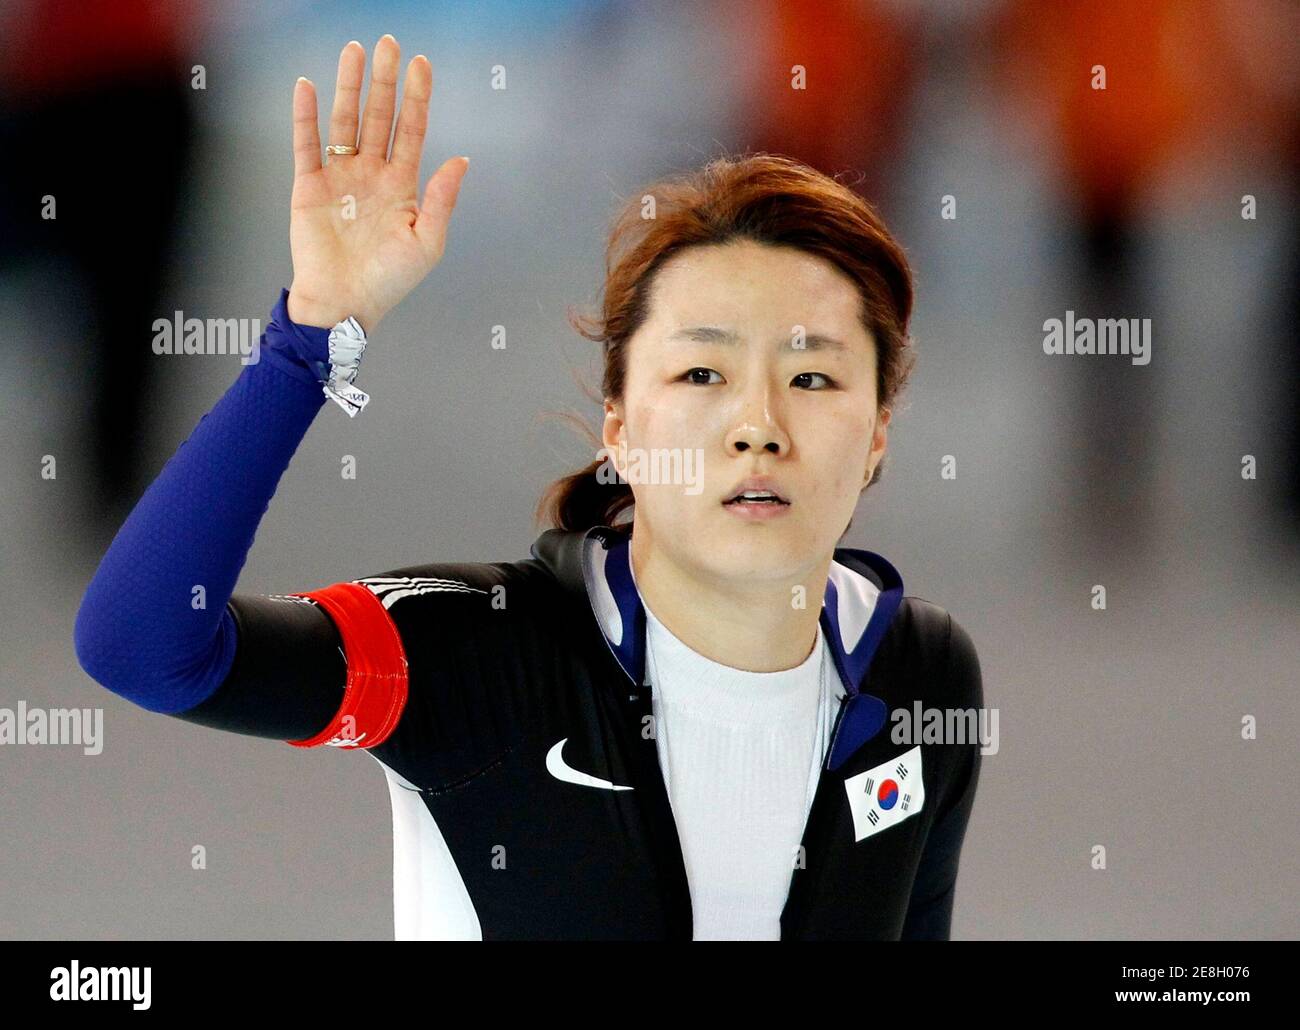 Lee Sang-Hwa of South Korea waves after competing in the women's 500 metres speed skating race at the Richmond Olympic Oval during the Vancouver 2010 Winter Olympics February 16, 2010.     REUTERS/Jerry Lampen (CANADA) Stock Photo